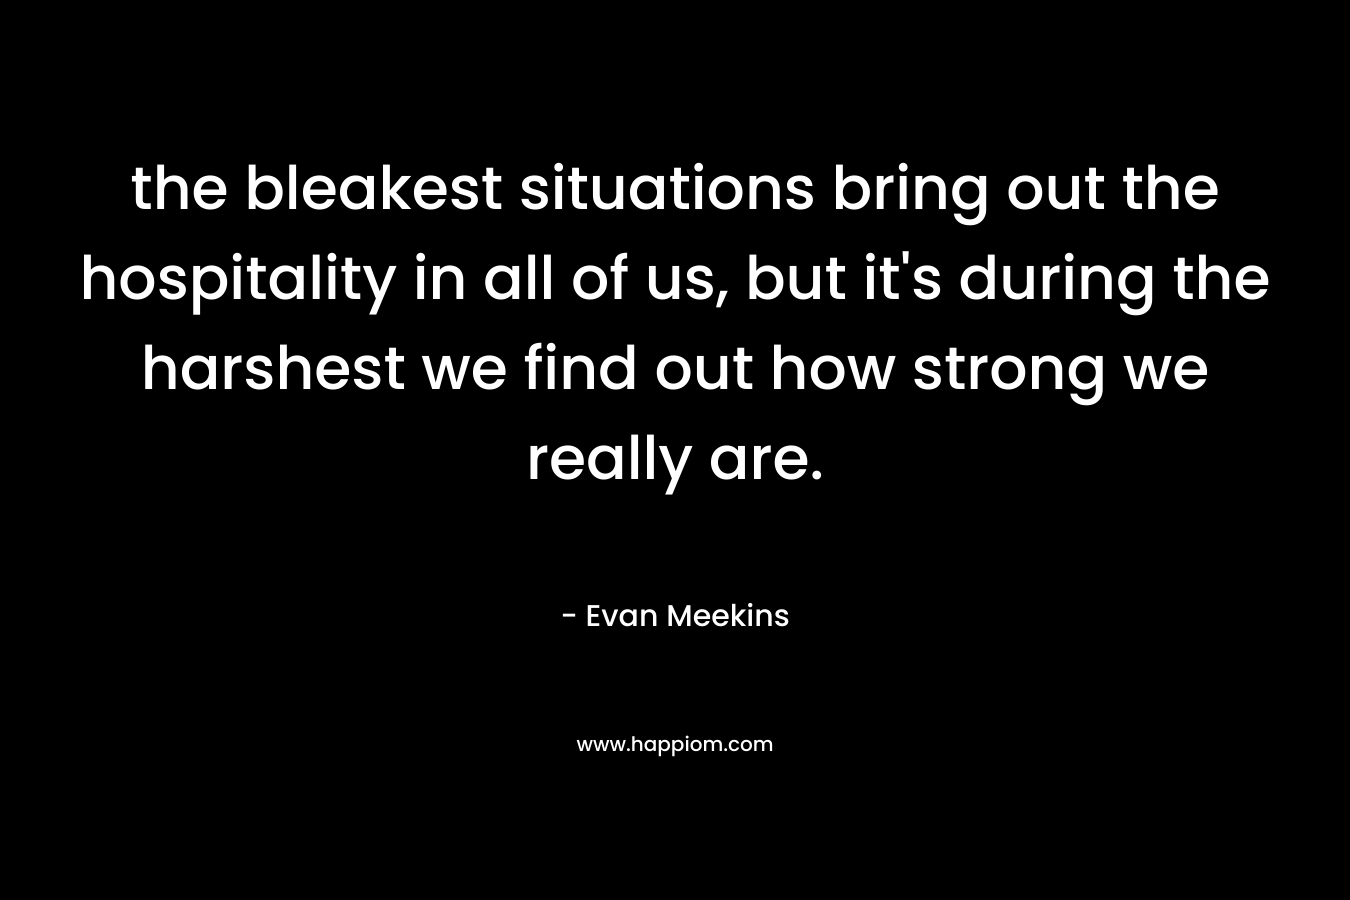 the bleakest situations bring out the hospitality in all of us, but it's during the harshest we find out how strong we really are.